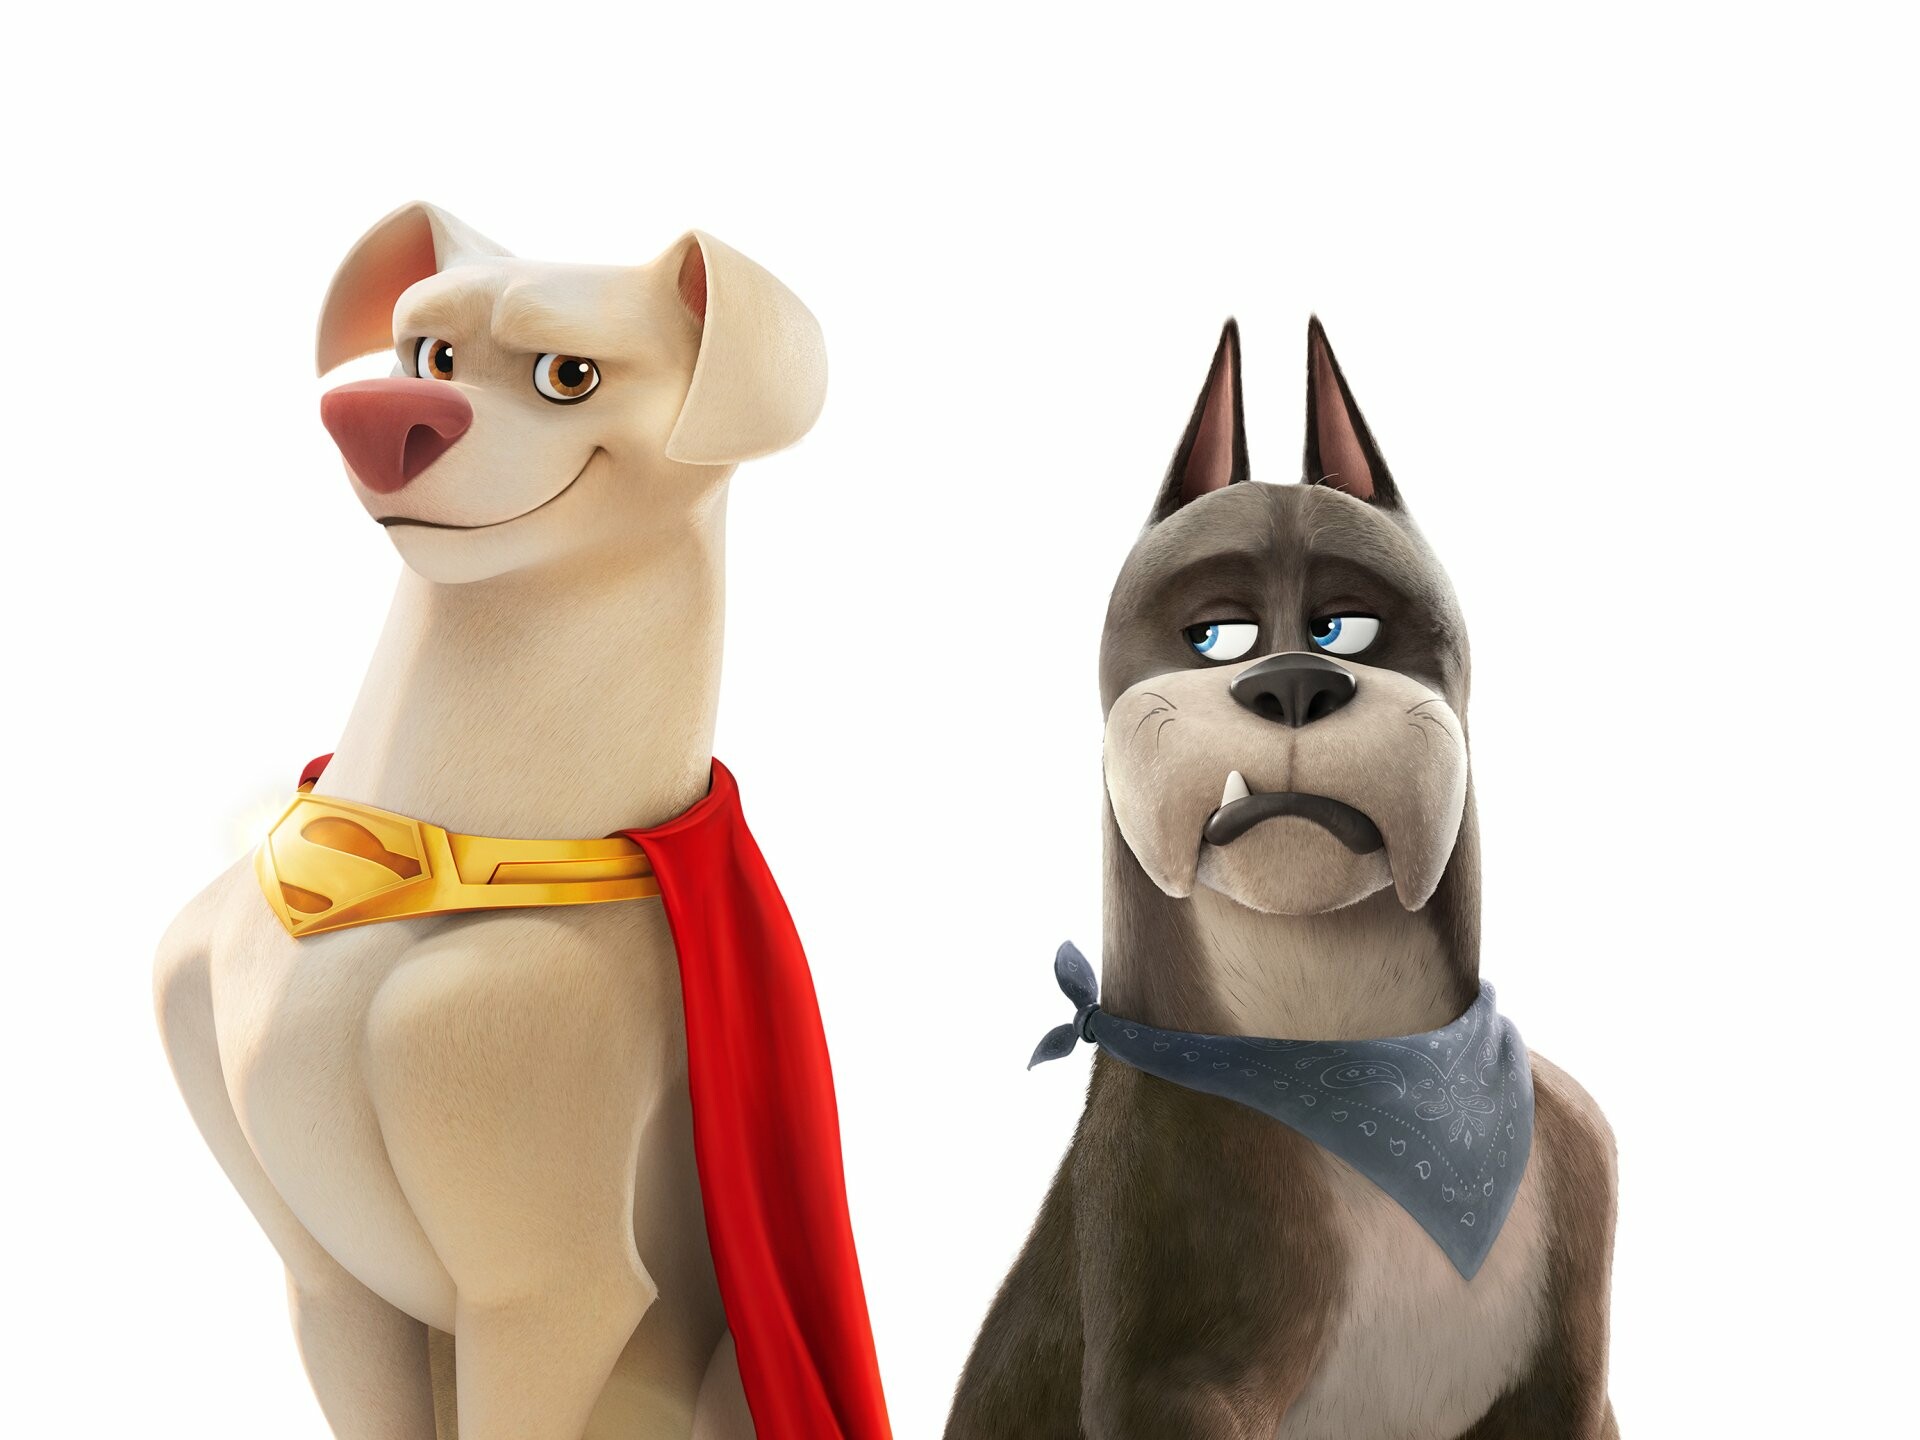 DC League of Super-Pets: Krypto the Superdog and Ace the Bat-Hound, Warner Bros. Pictures. 1920x1440 HD Wallpaper.